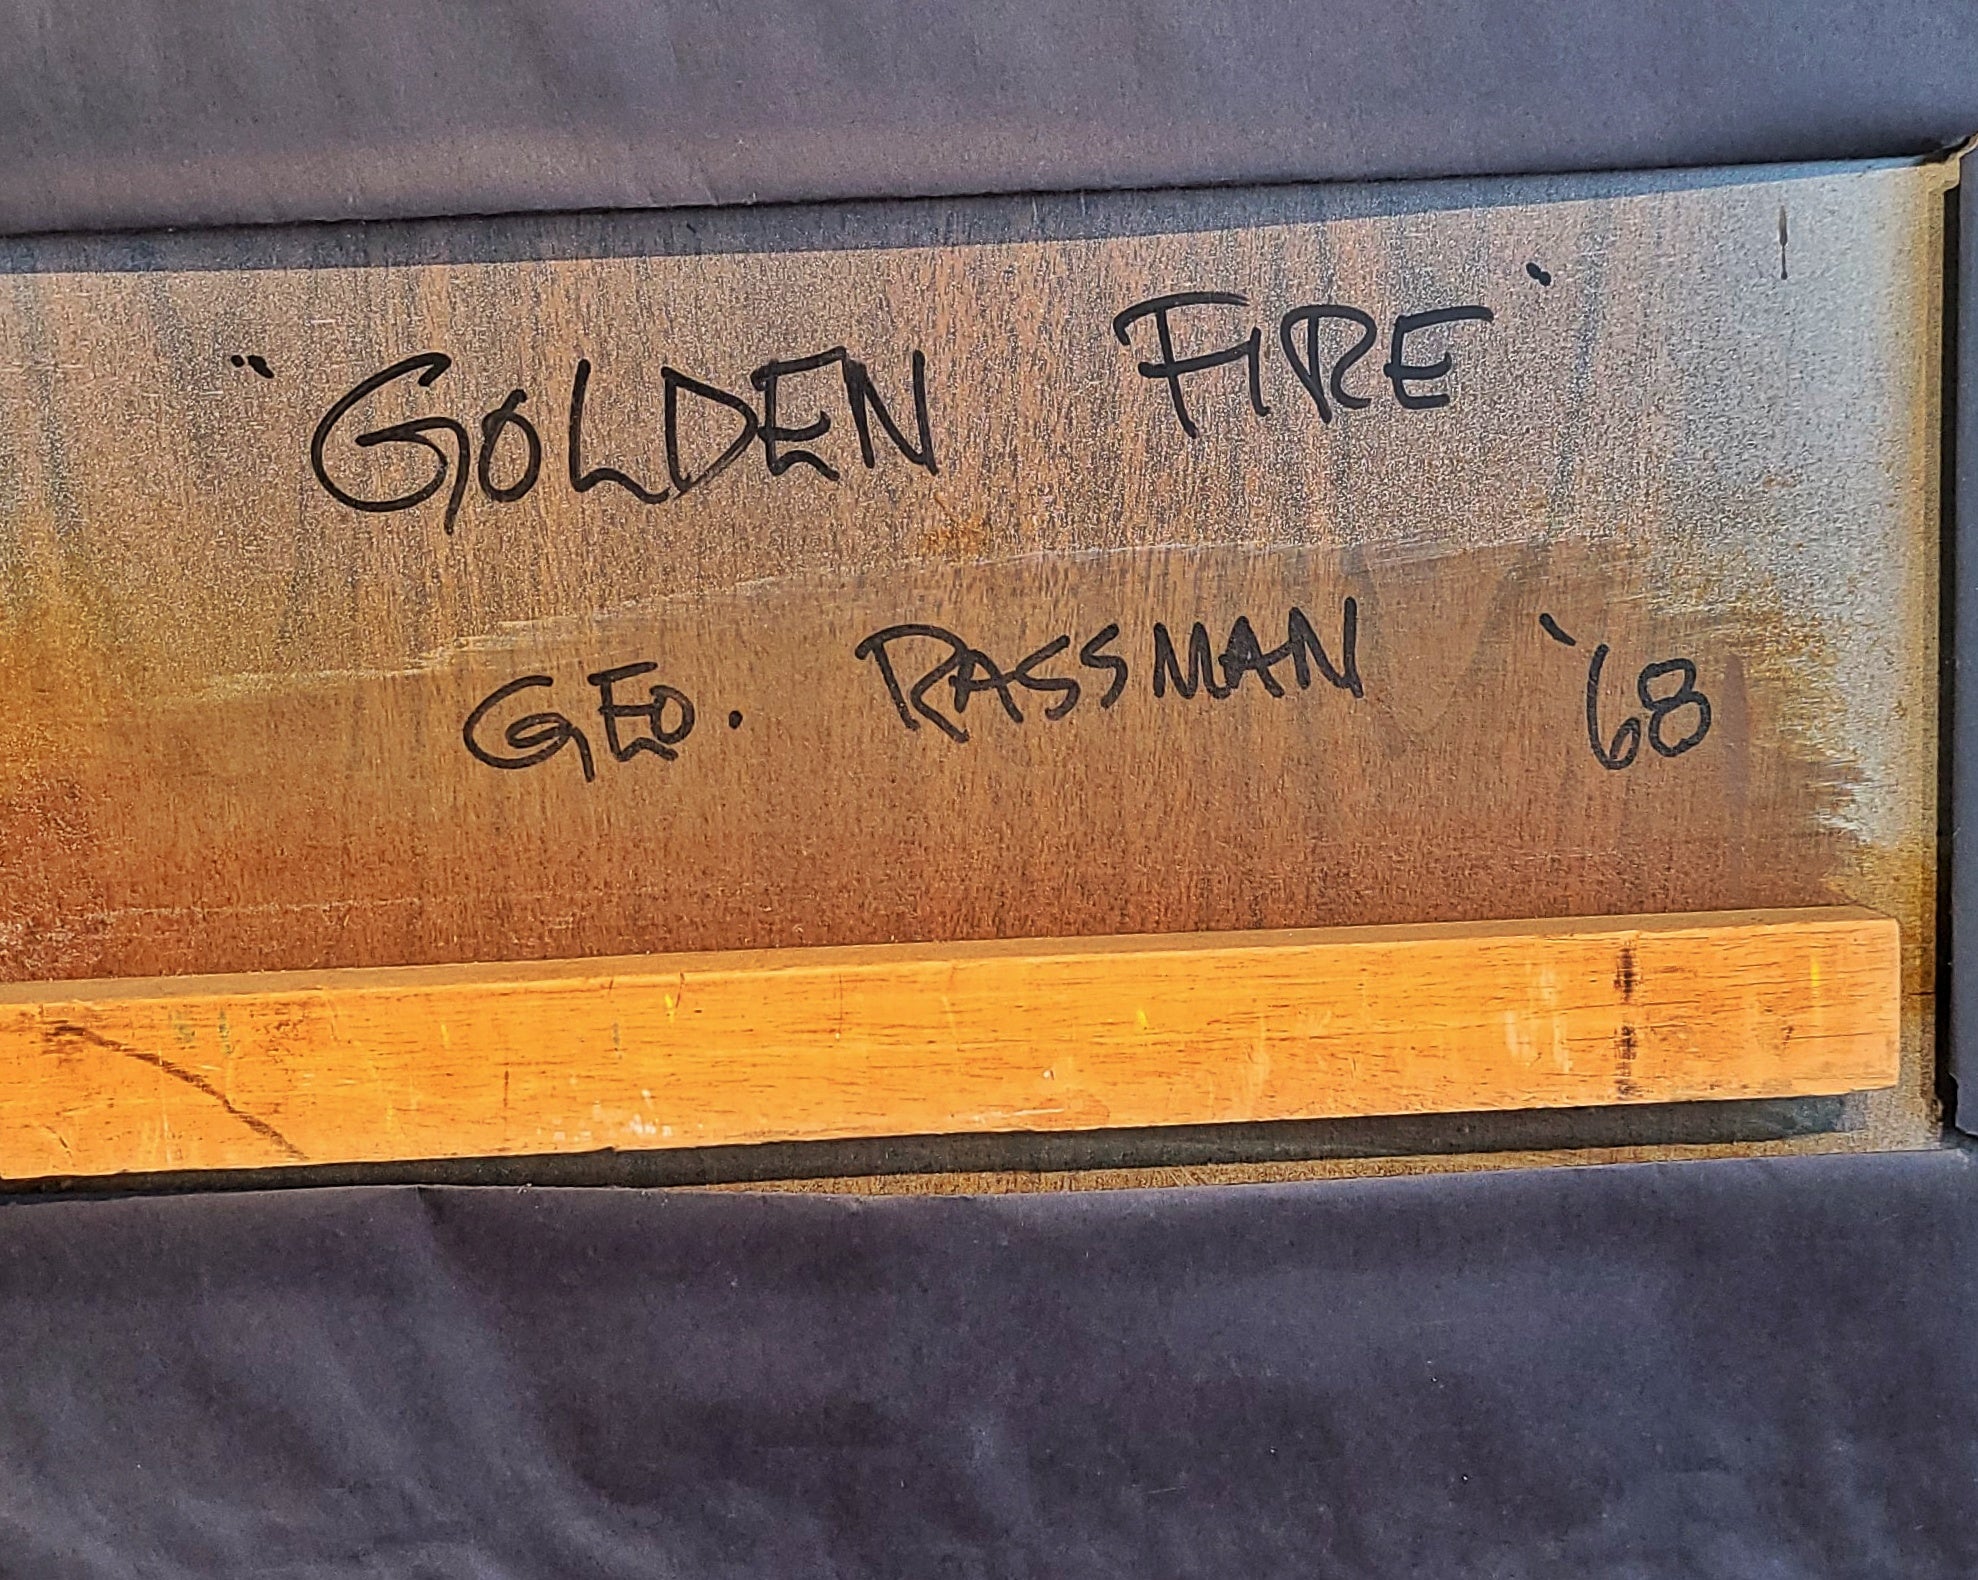 ‘GOLDEN FIRE’ POLYMER ON PANEL BY GEORGE RASSMAN (1968)